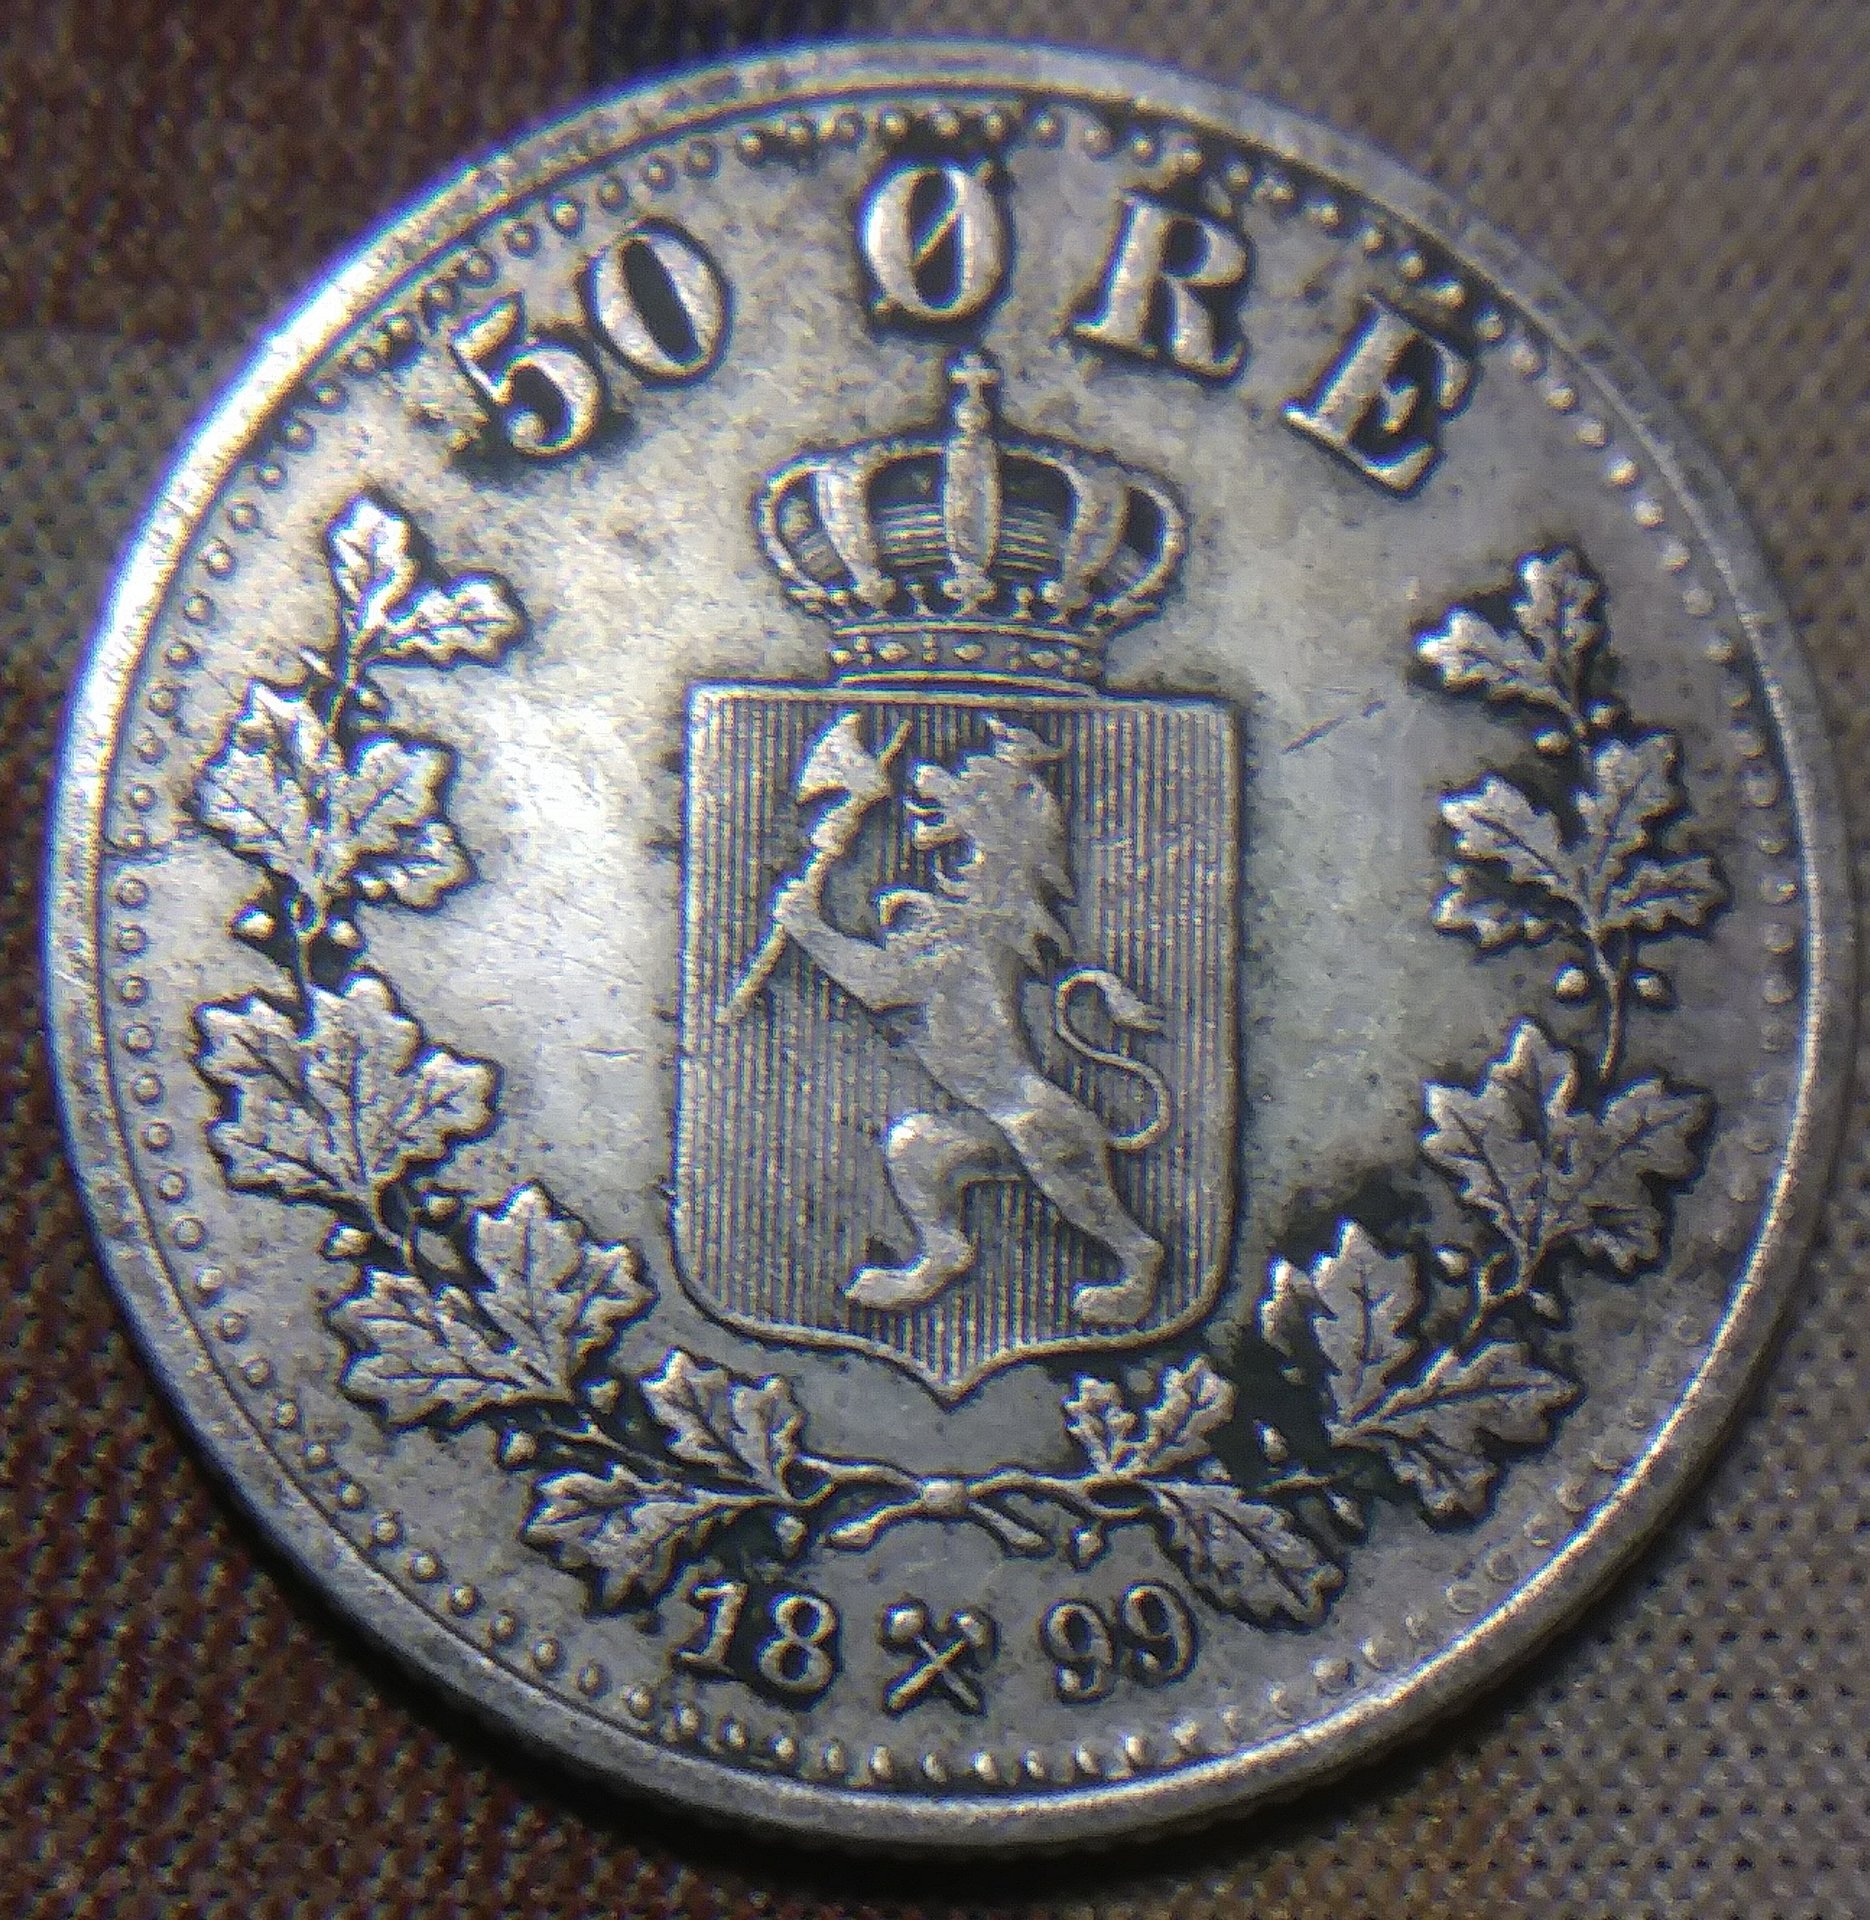 1899 norway 50 ore. | Coin Talk